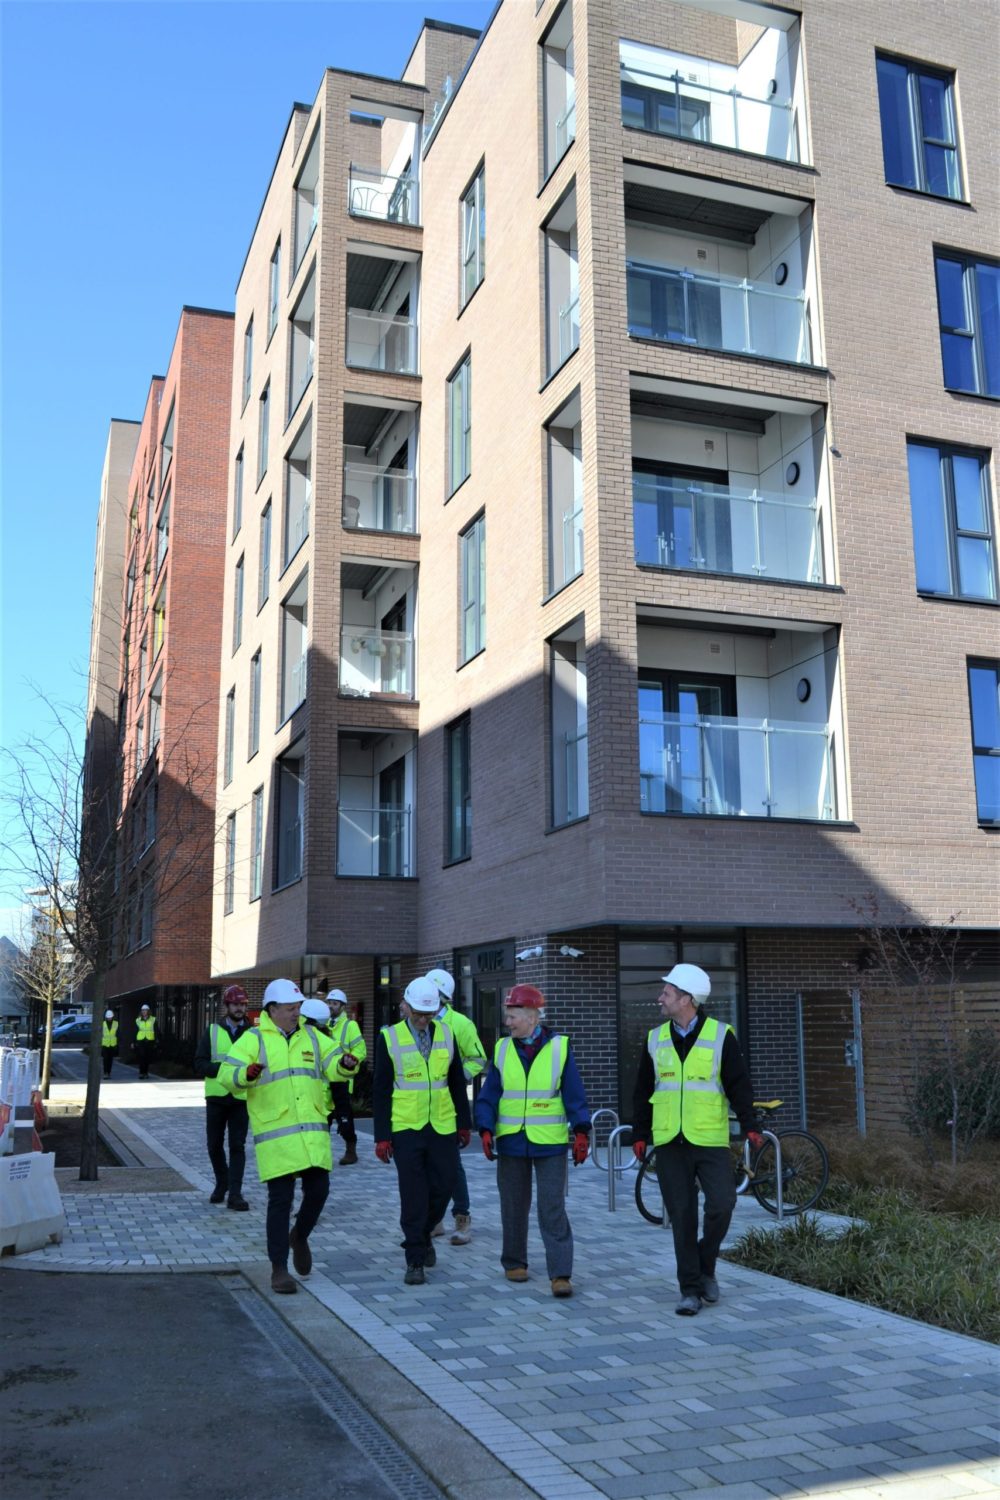 CIOB visit to Canary Quay, Norwich, 17 March 2022